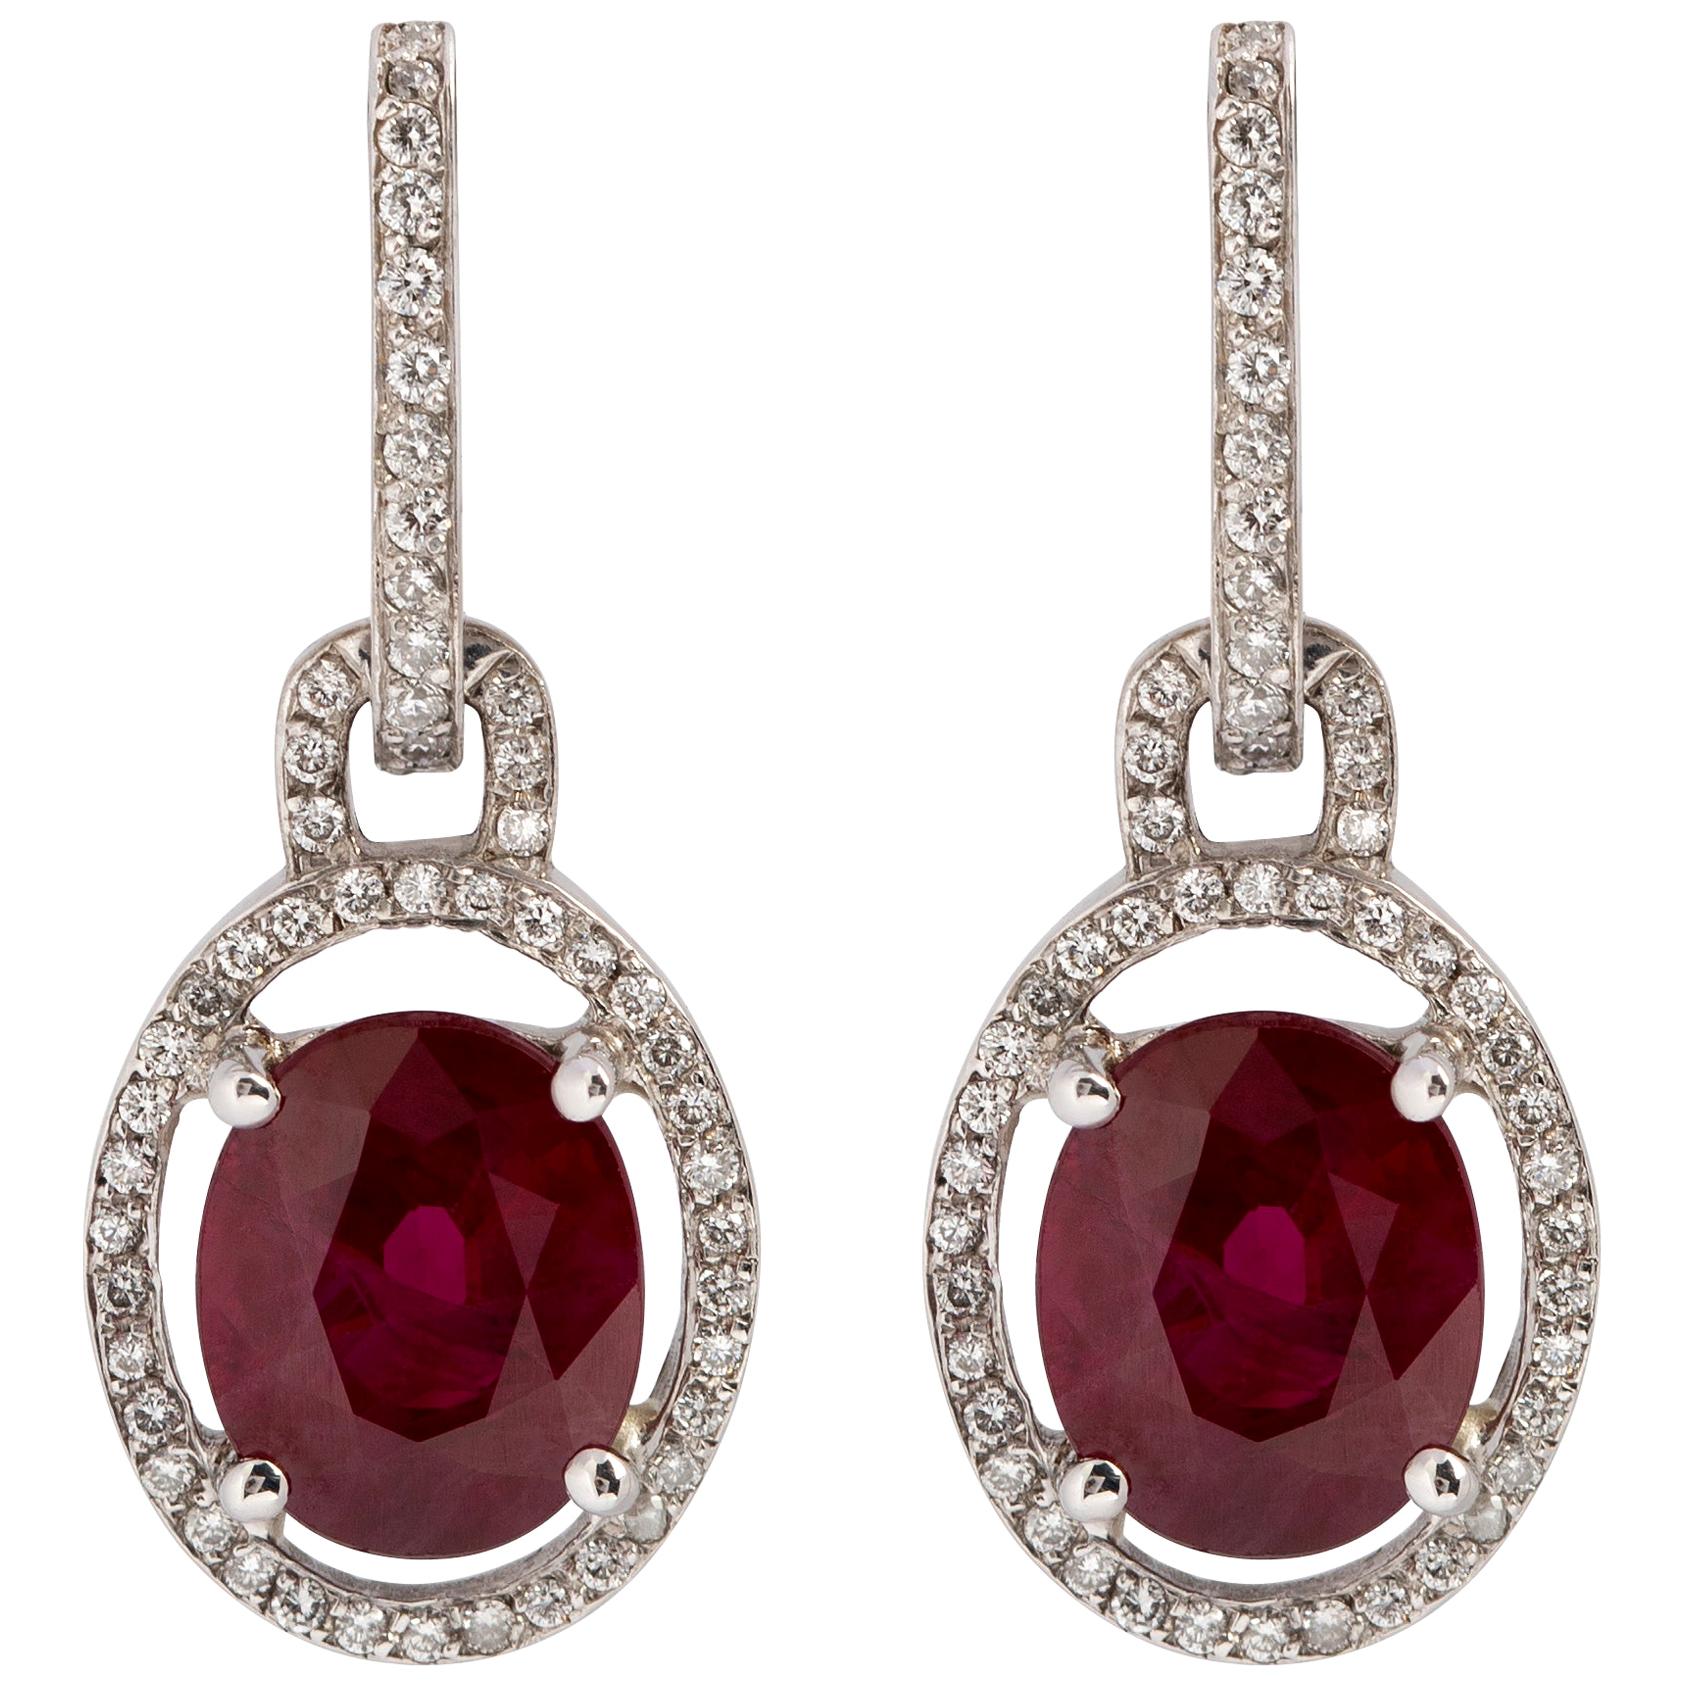 Gems Are Forever 5 Carat Ruby and Pave Diamond Earrings